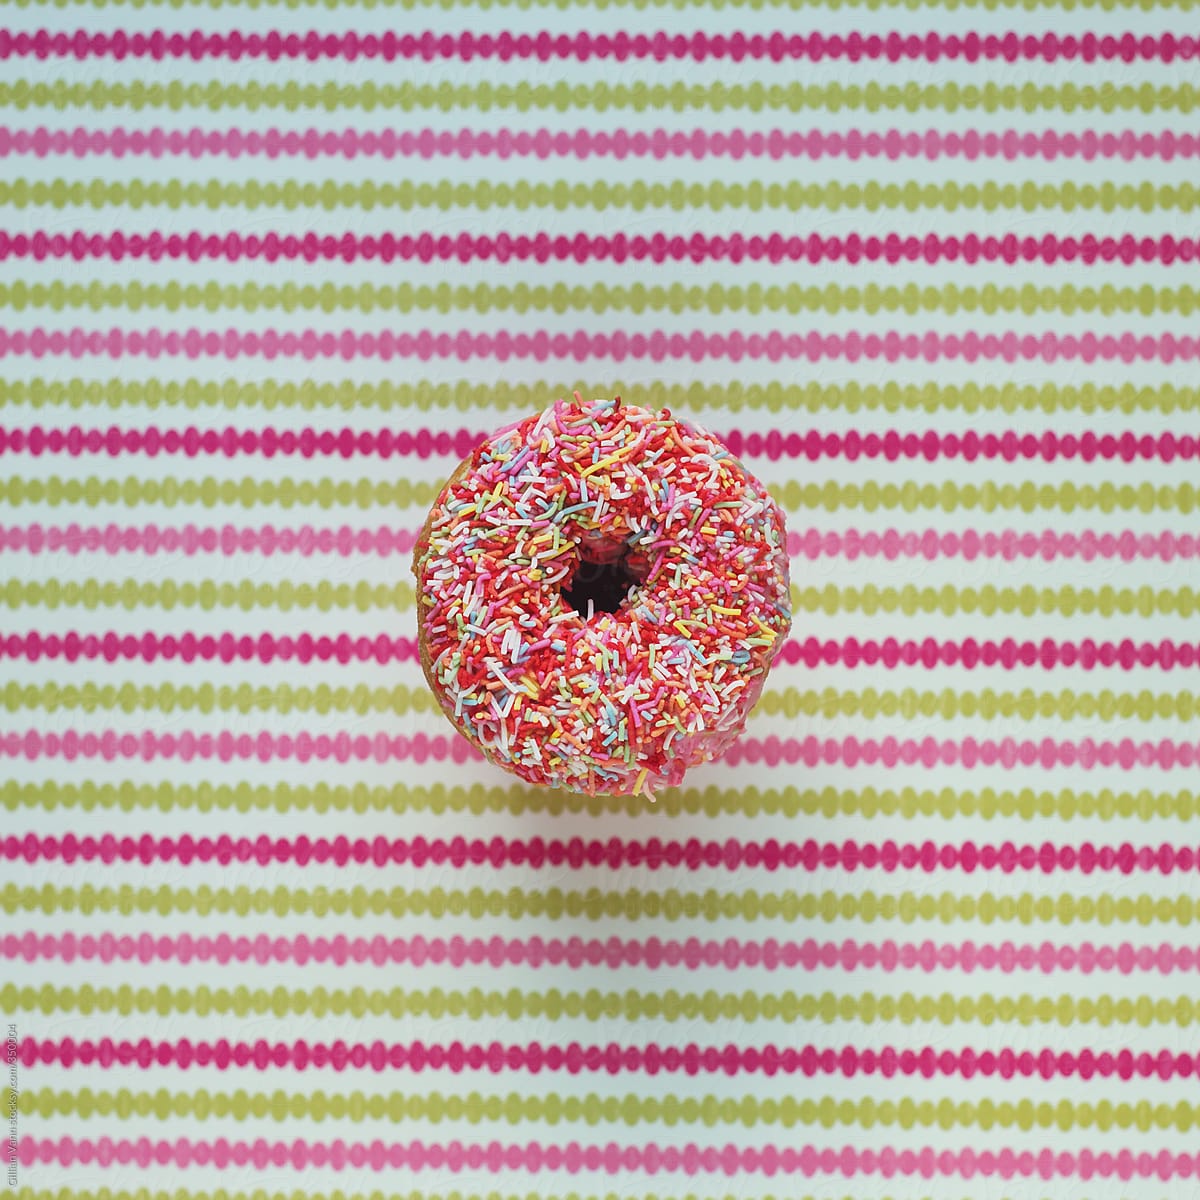 sweet iced donut with sprinkles on a striped background